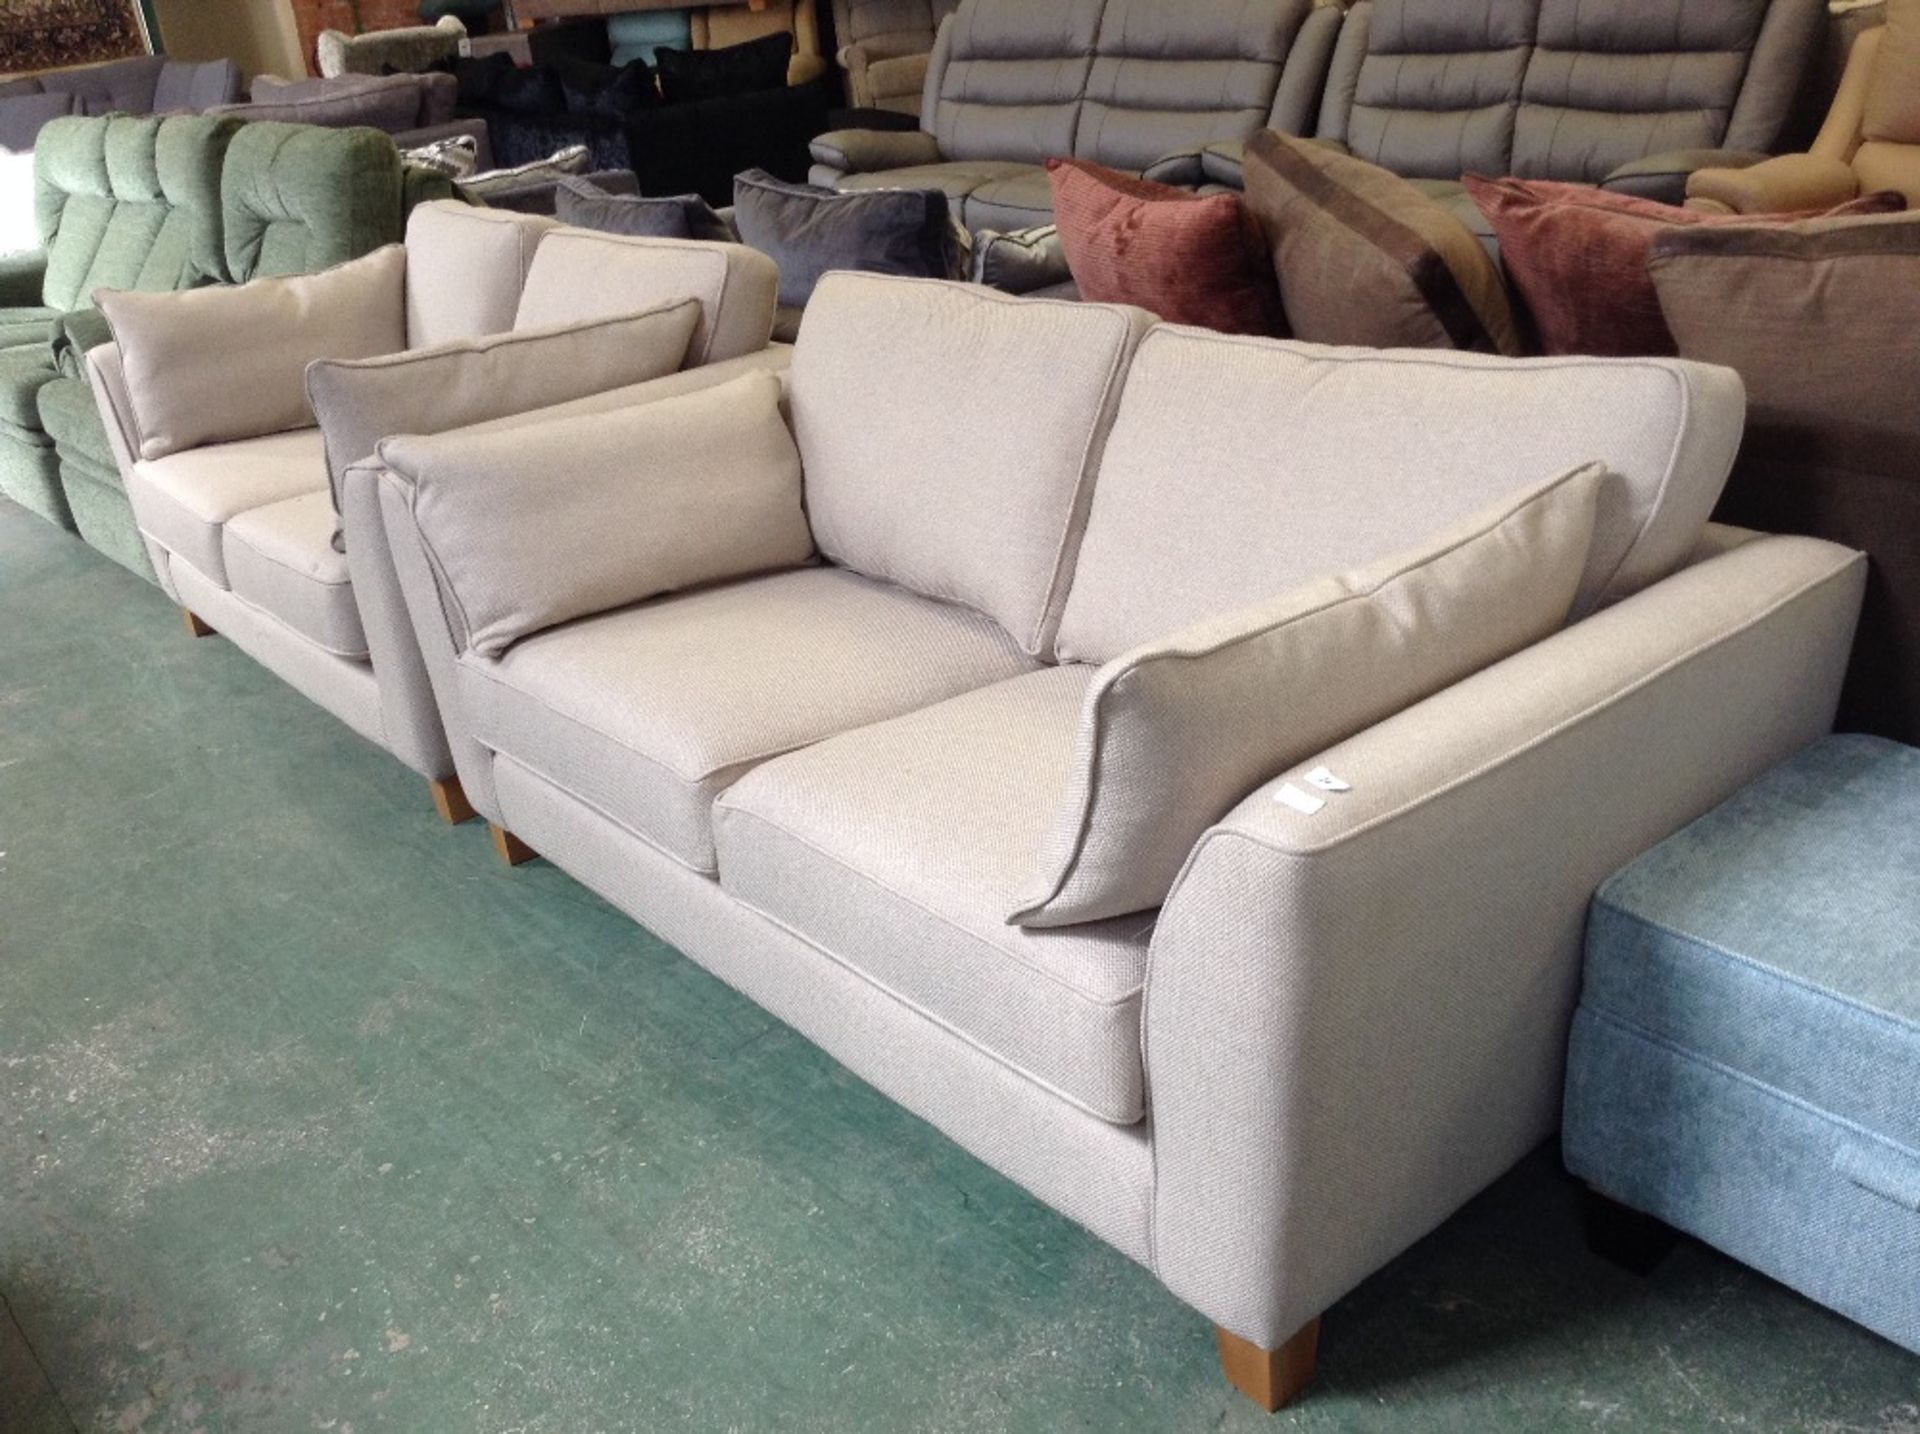 BISCUIT 2.5 SEATER SOFA AND 2 SEATER SOFA